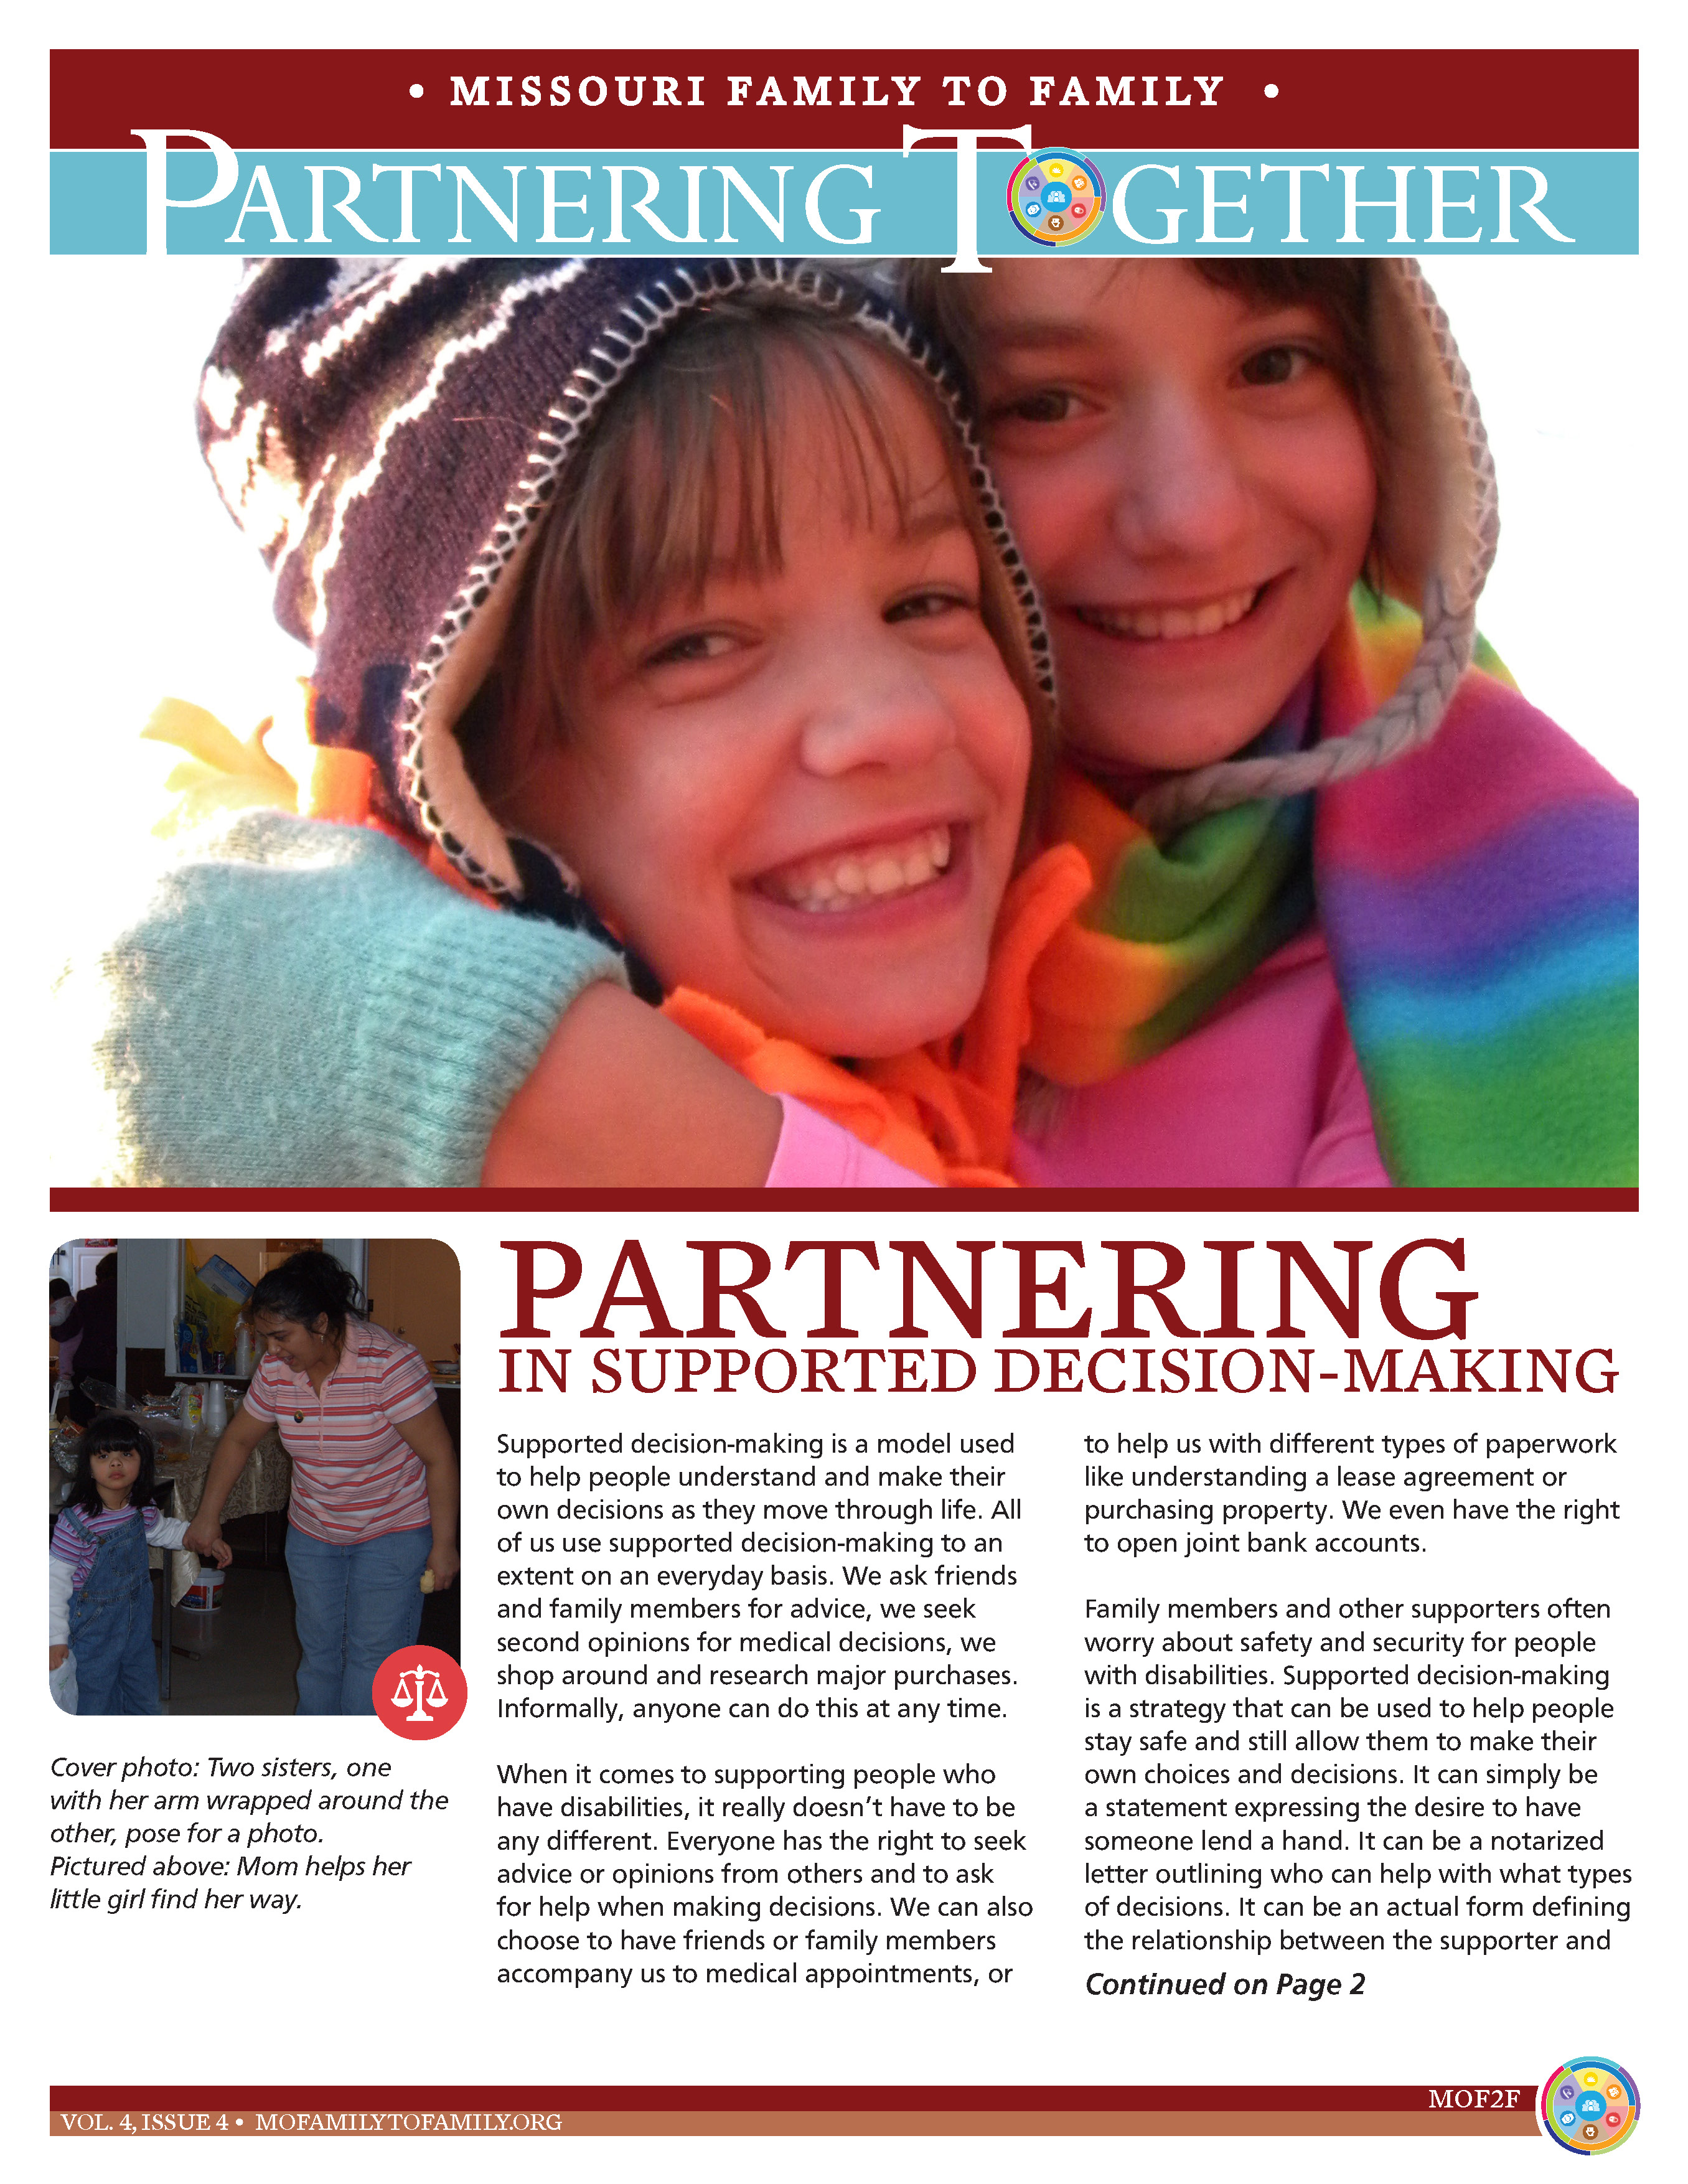 Graphic: Screenshot of Partnering Together Magazine, issue 4.4 - Partnering in Supported Decision-making